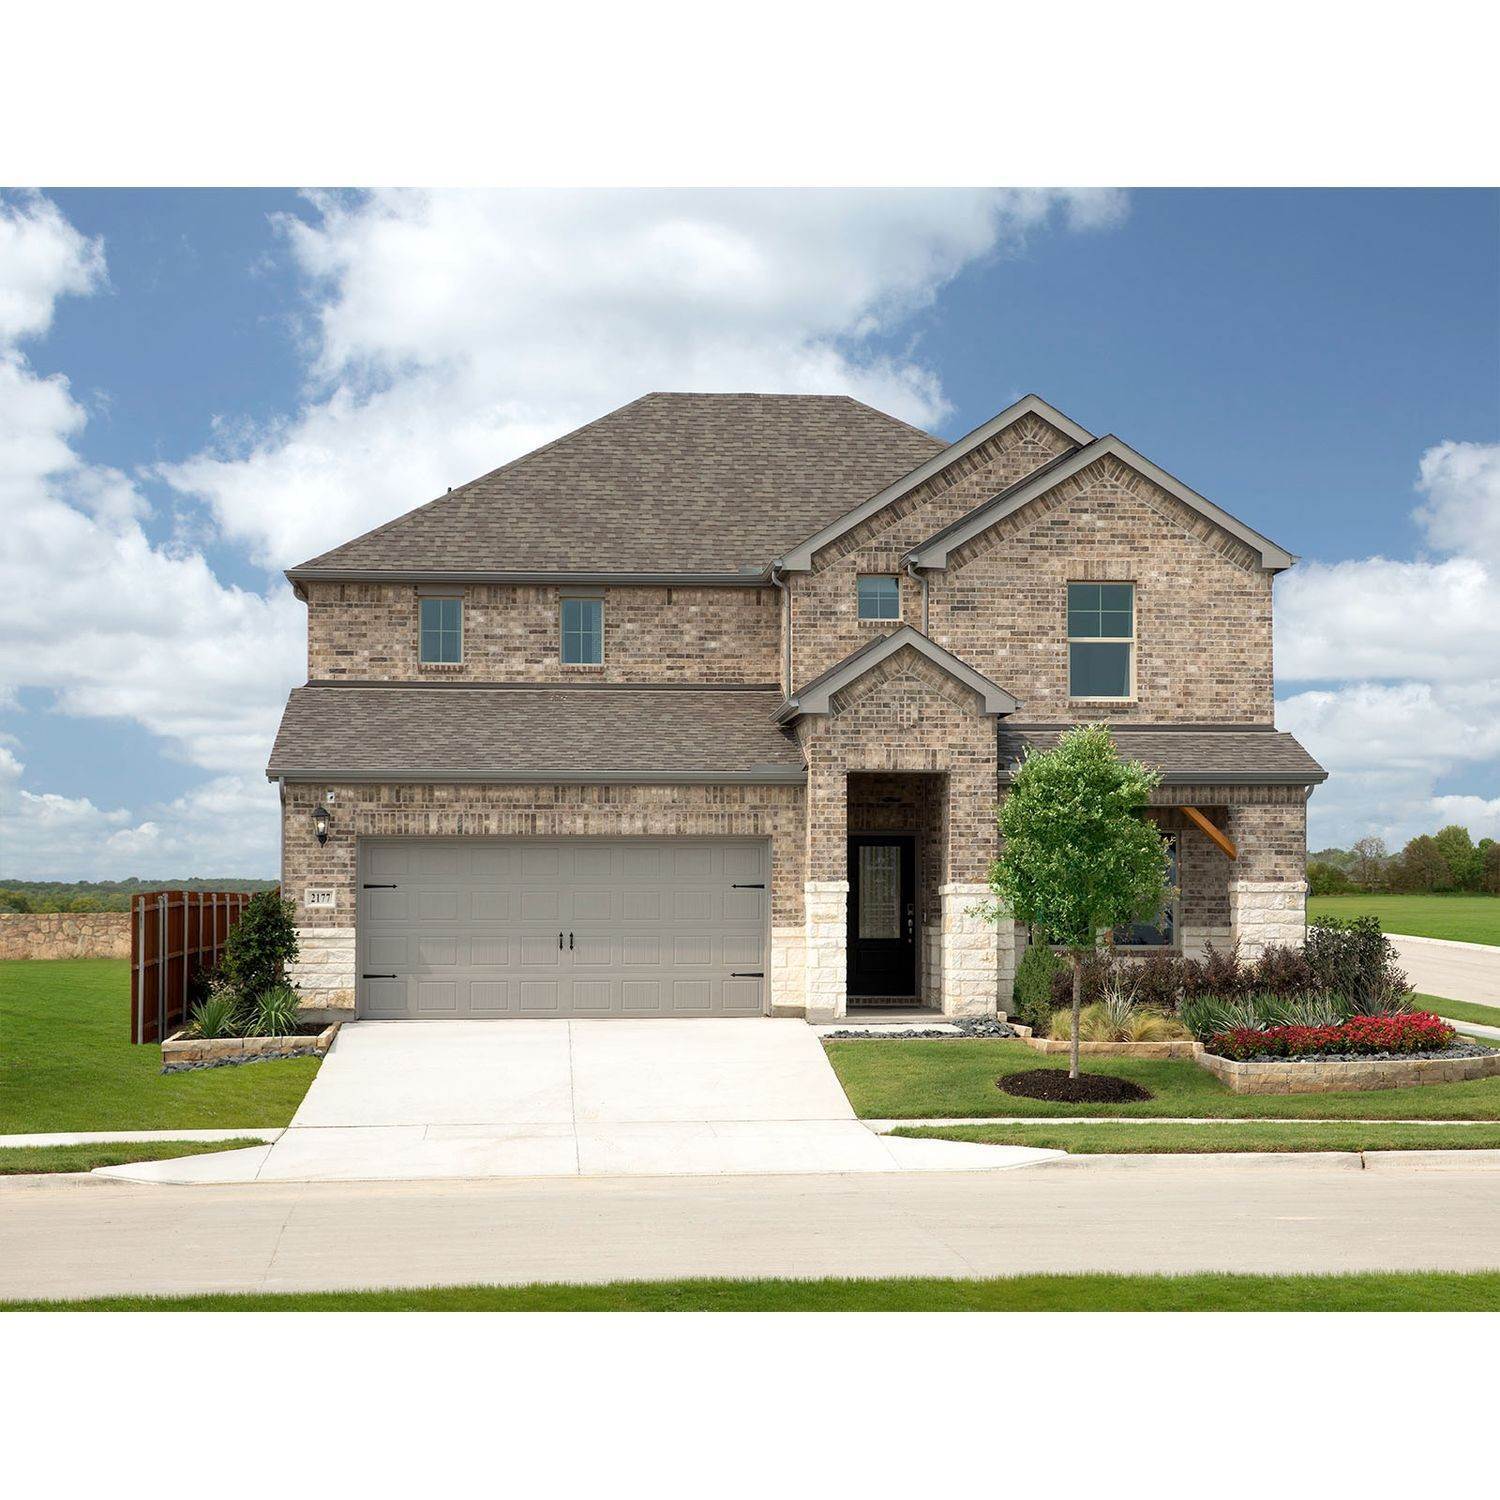 Northstar building at 2177 Gill Star Drive, Haslet, TX 76052